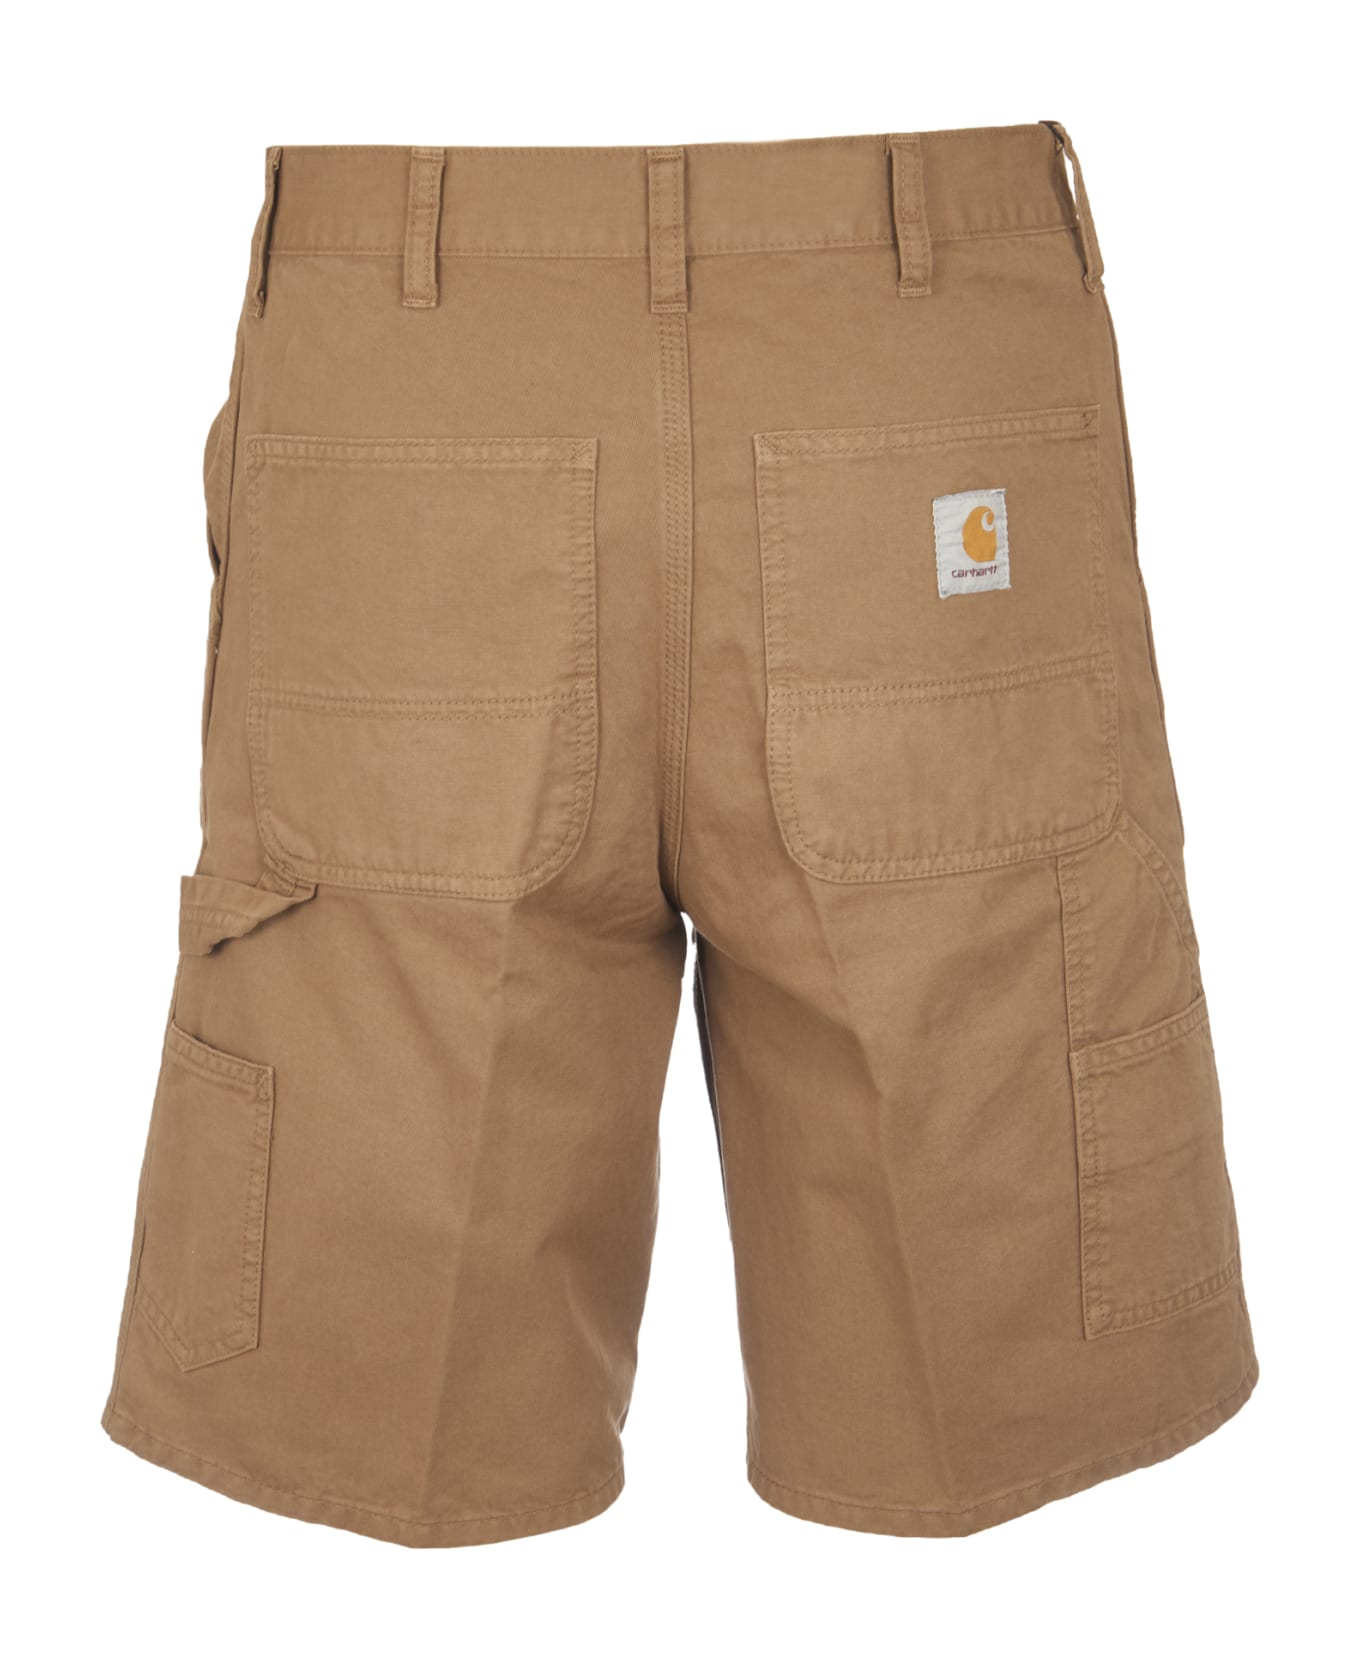 Carhartt Fitted Buttoned Shorts - Buffalo ショートパンツ